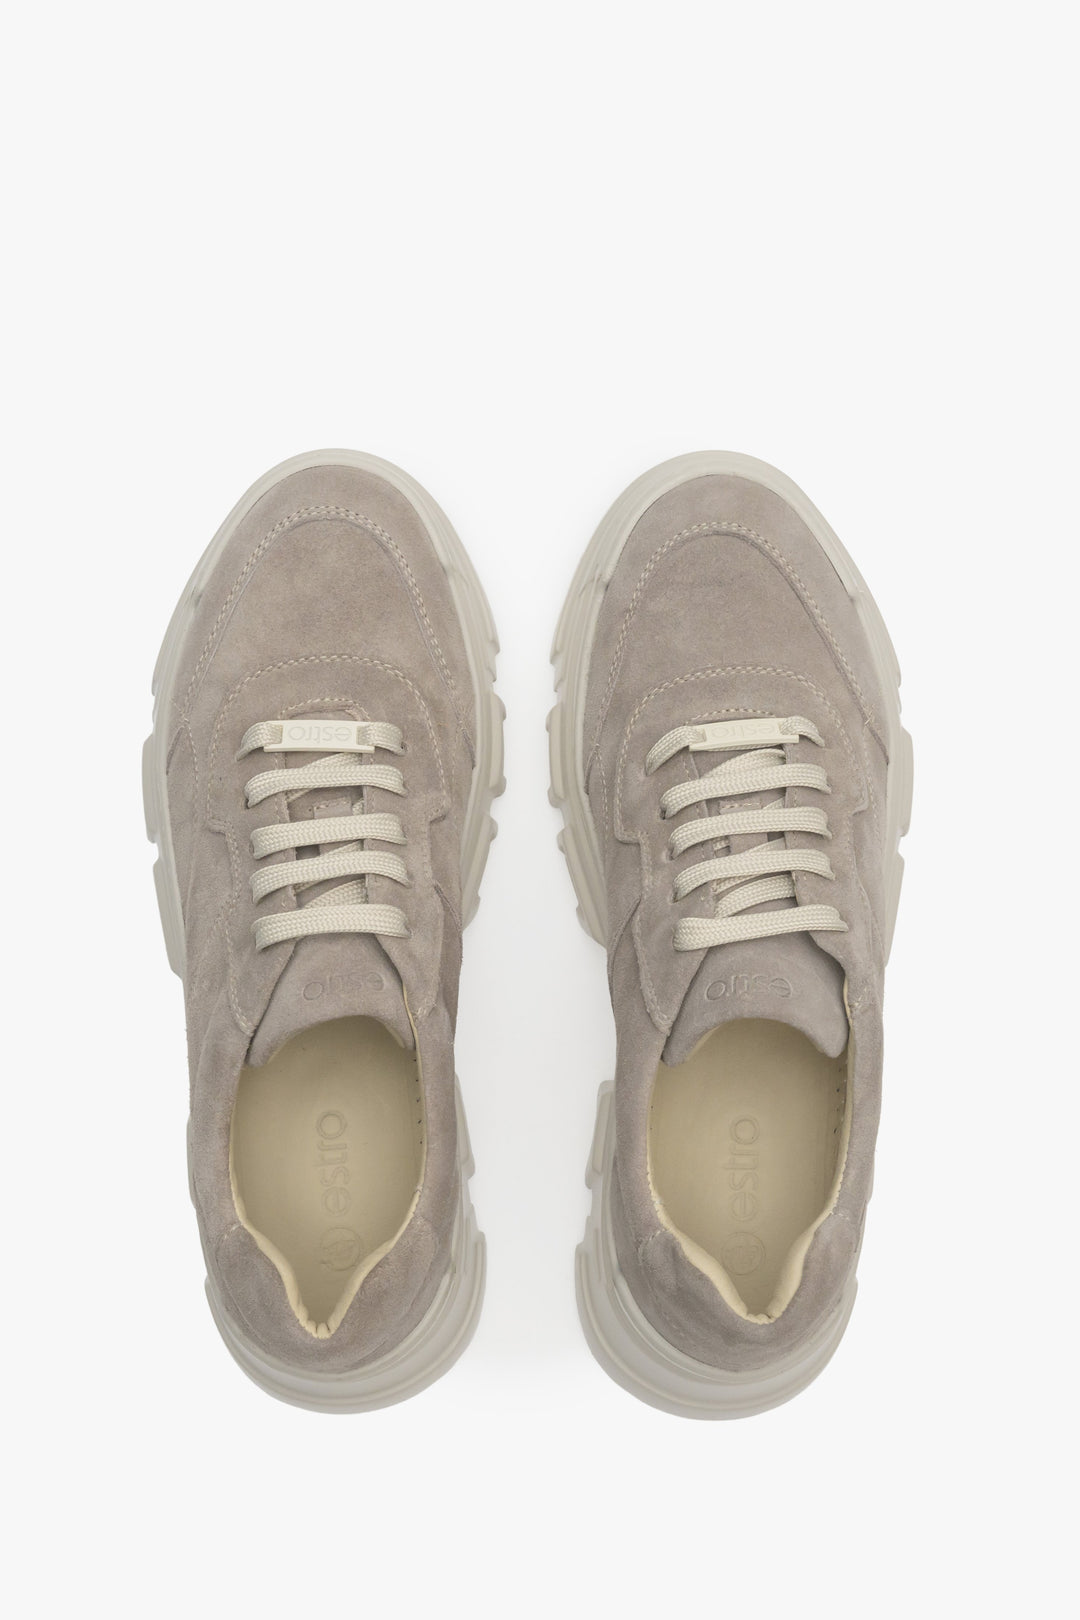 Women's grey sneakers chunky platform - presentation of the model from above.